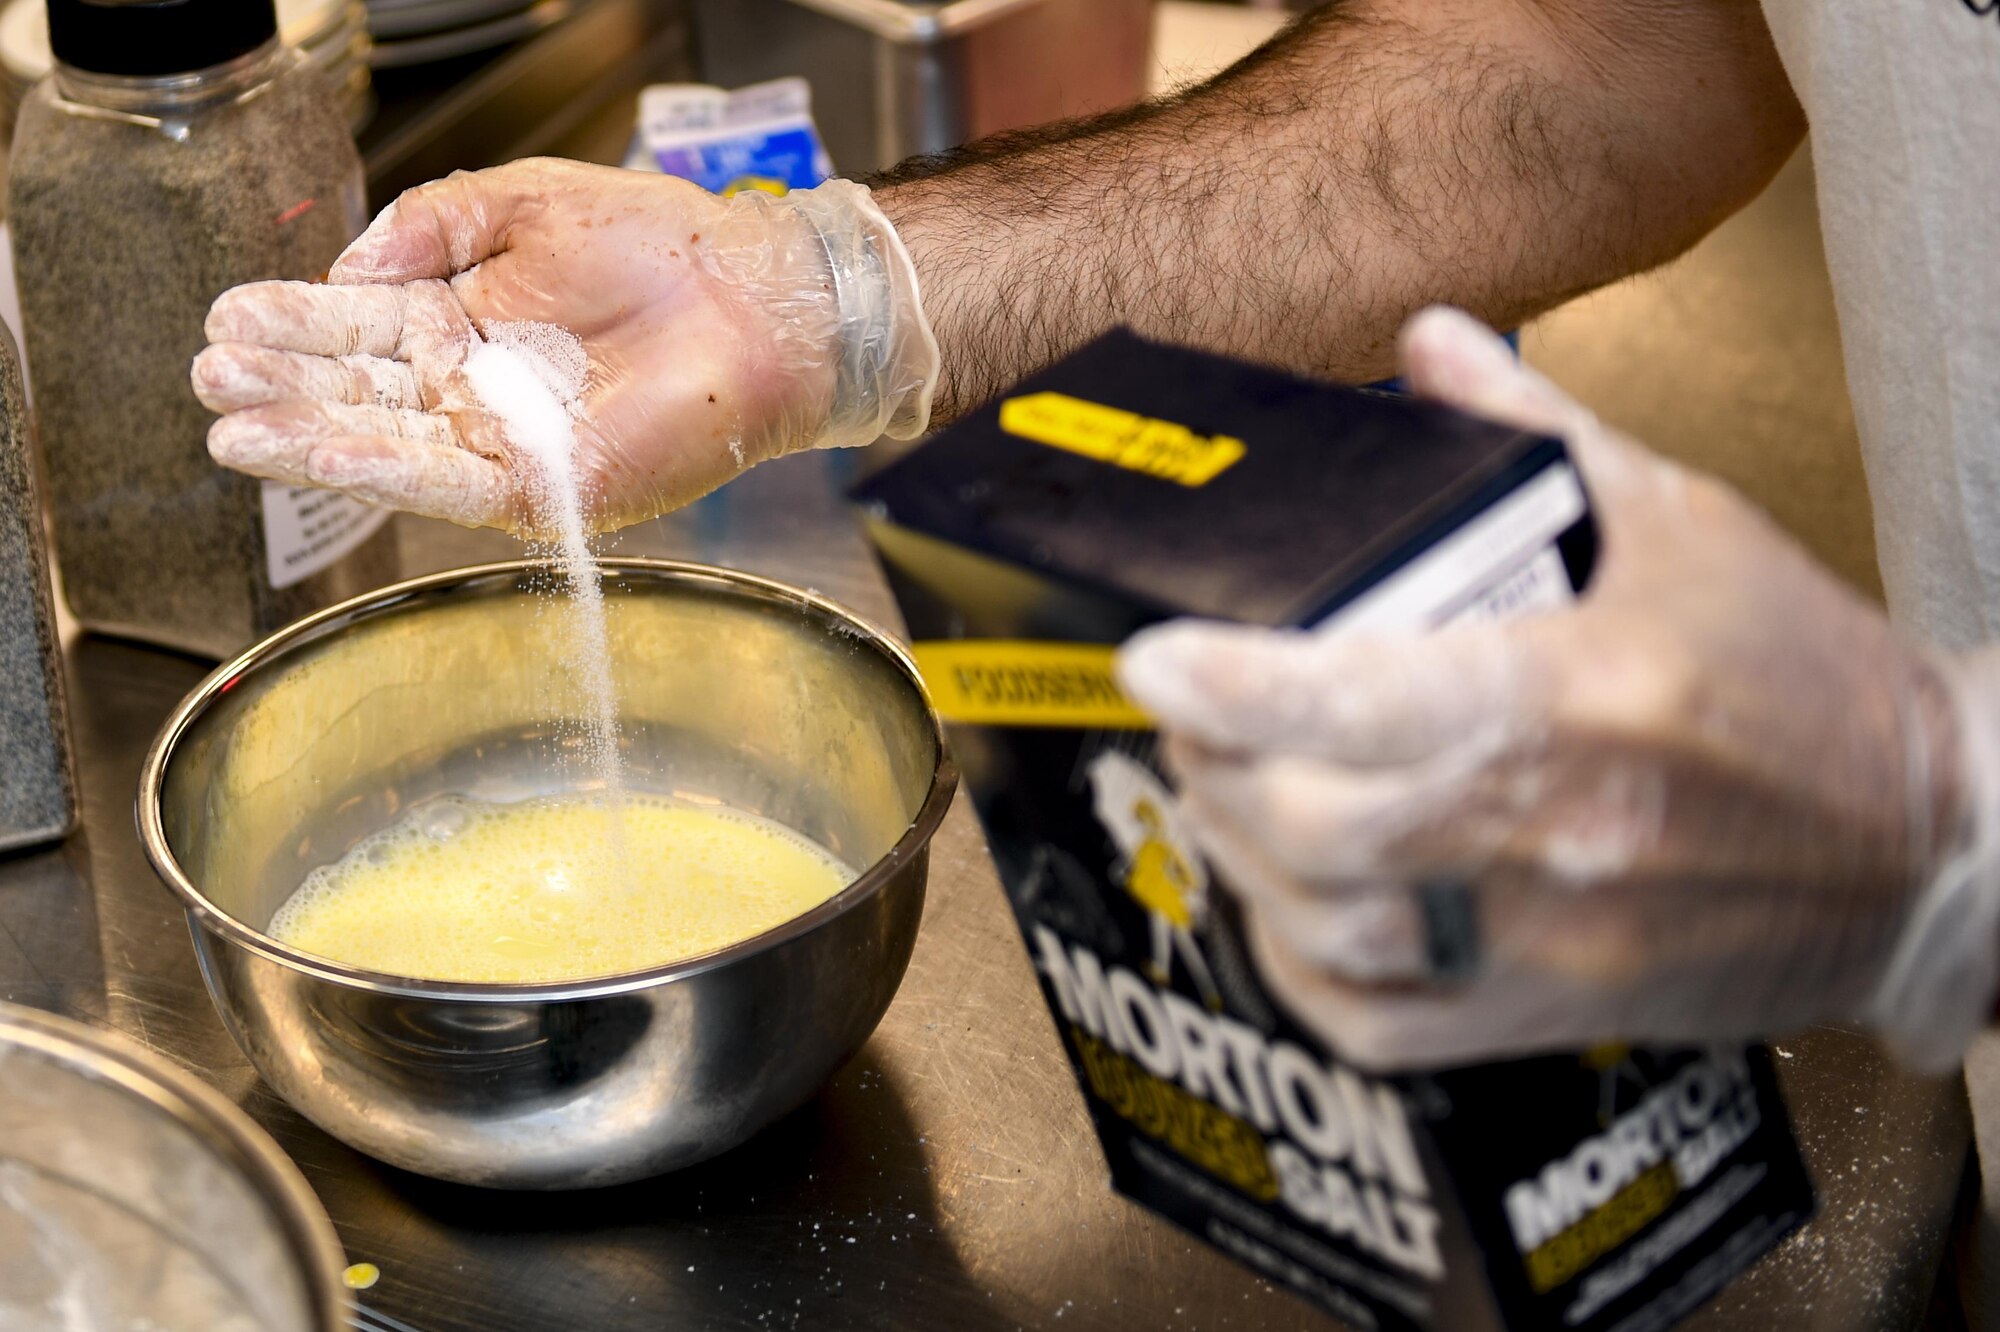 Mr. Derrick Harris, 23d Force Support Squadron Casualty Assistance Representative and
Survivor Benefit Plan counselor, adds salt to his mixture during the first Iron Chef Competition held at the Georgia Pines Dinning Facility ,March 23, 2017, at Moody Air Force Base, Ga. Four teams were given an hour to prepare their meals for the judges. The 23d Force Support Squadron plans to hold at least one Iron Chef Competition per year. (U.S. Air Force photo by Airman 1st Class Daniel Snider)
